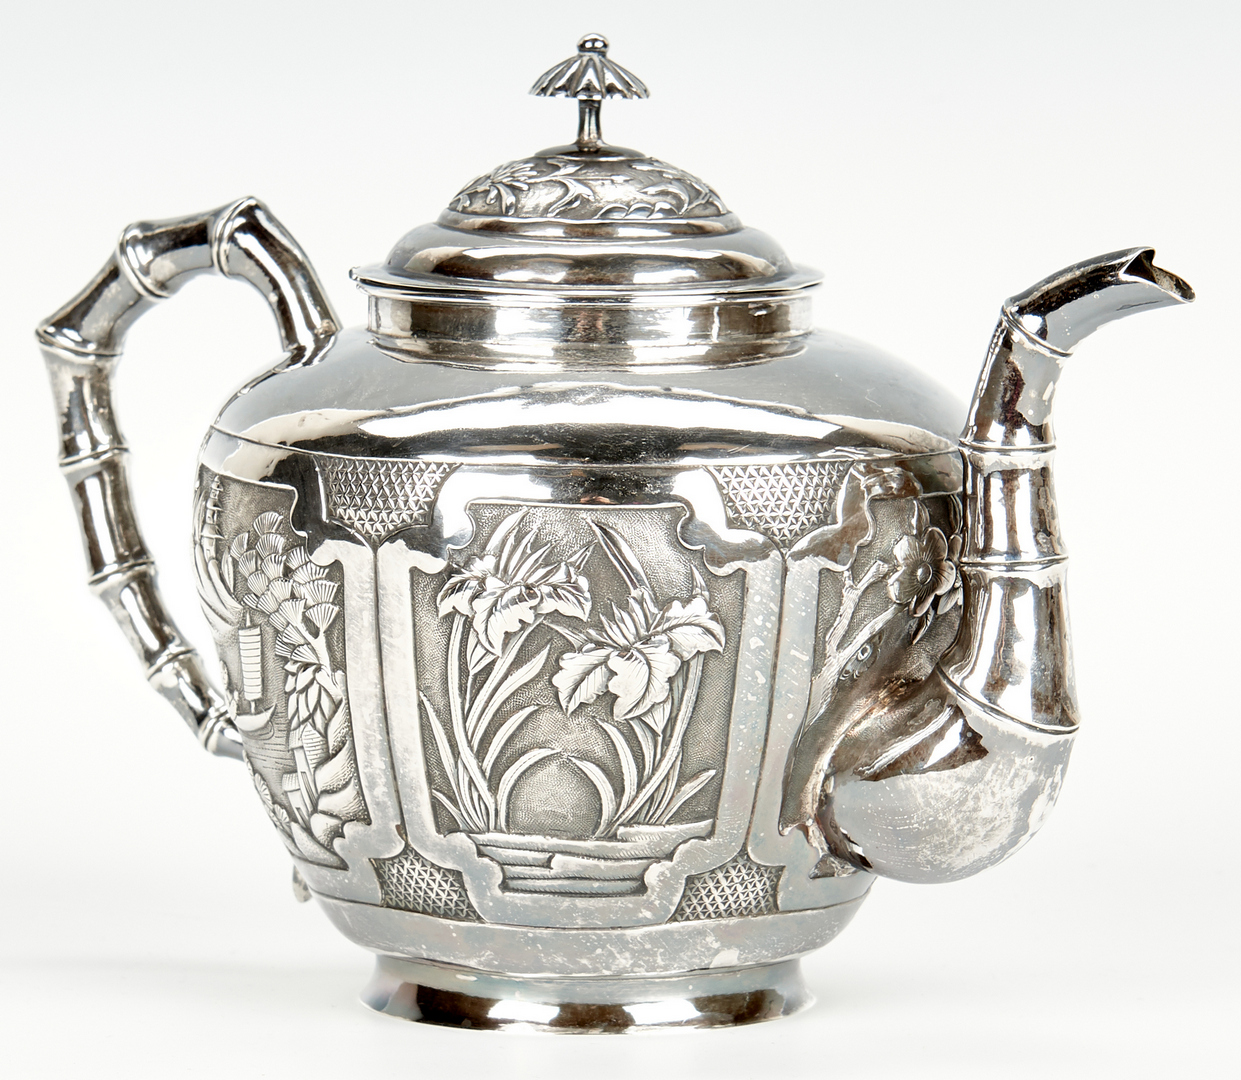 Lot 1: 3 Pc. Chinese Export Silver Tea Service